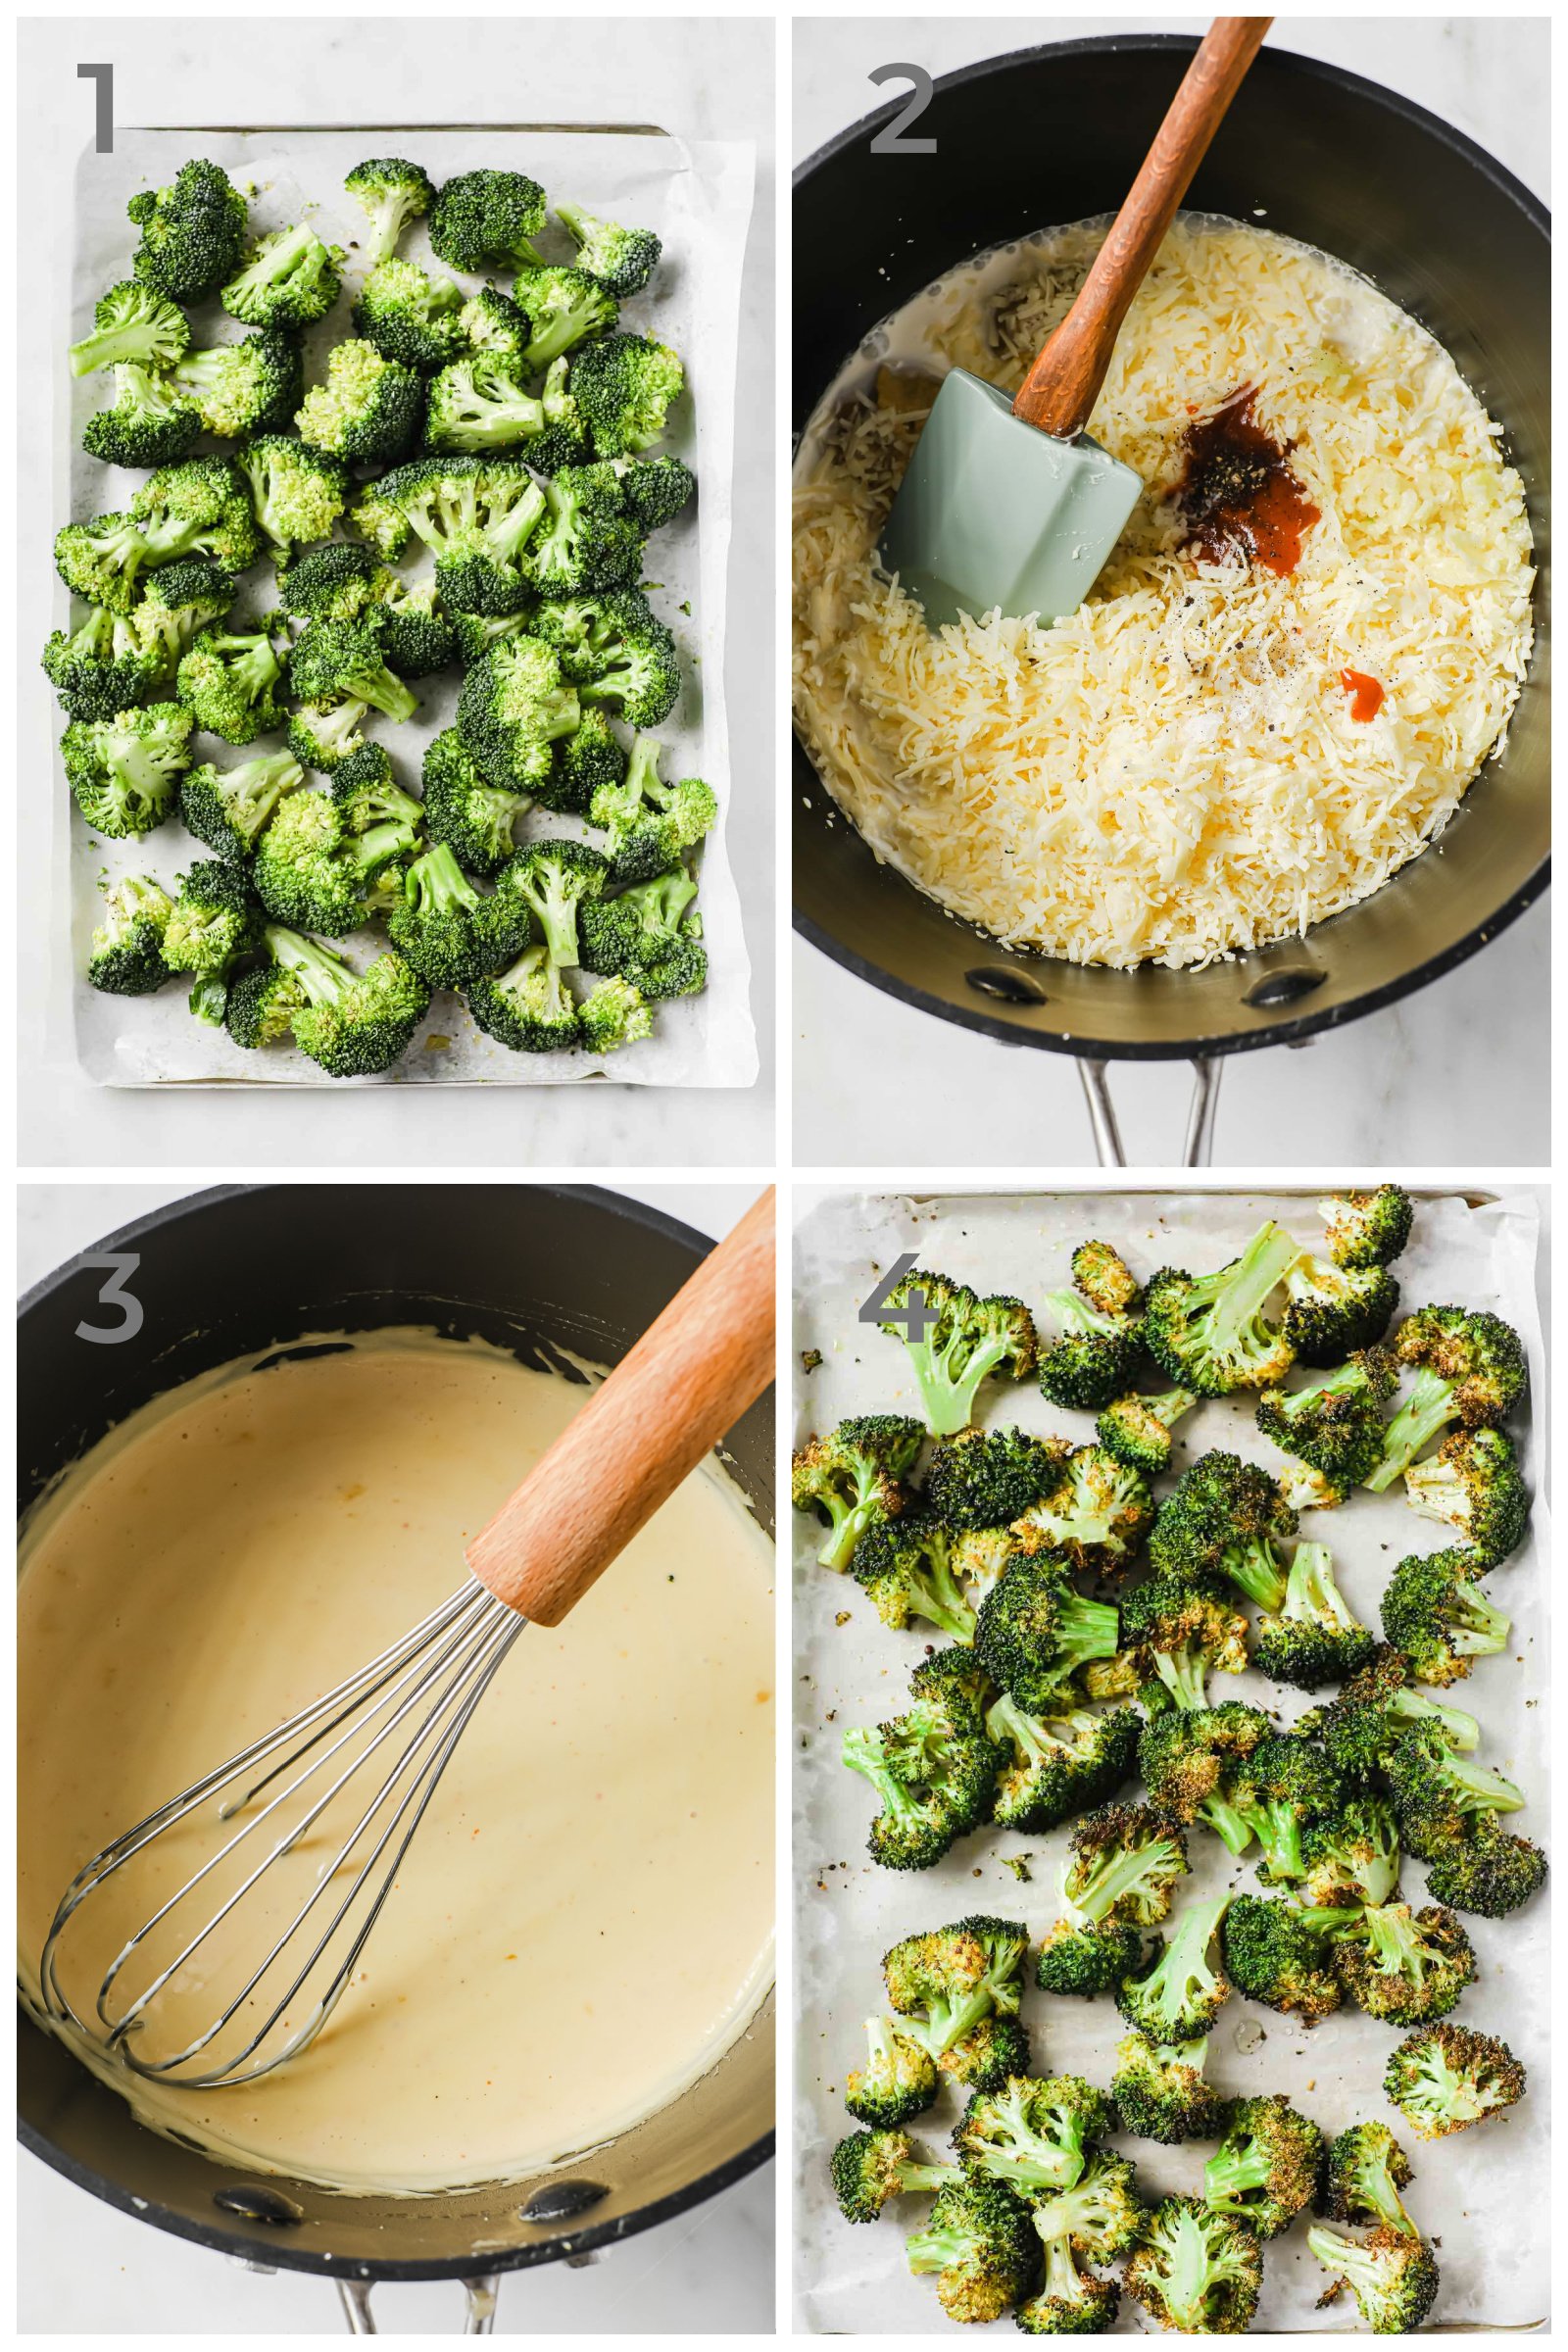 Step by step photos showing how to roast broccoli on a sheet pan in the oven and make homemade cheese sauce.